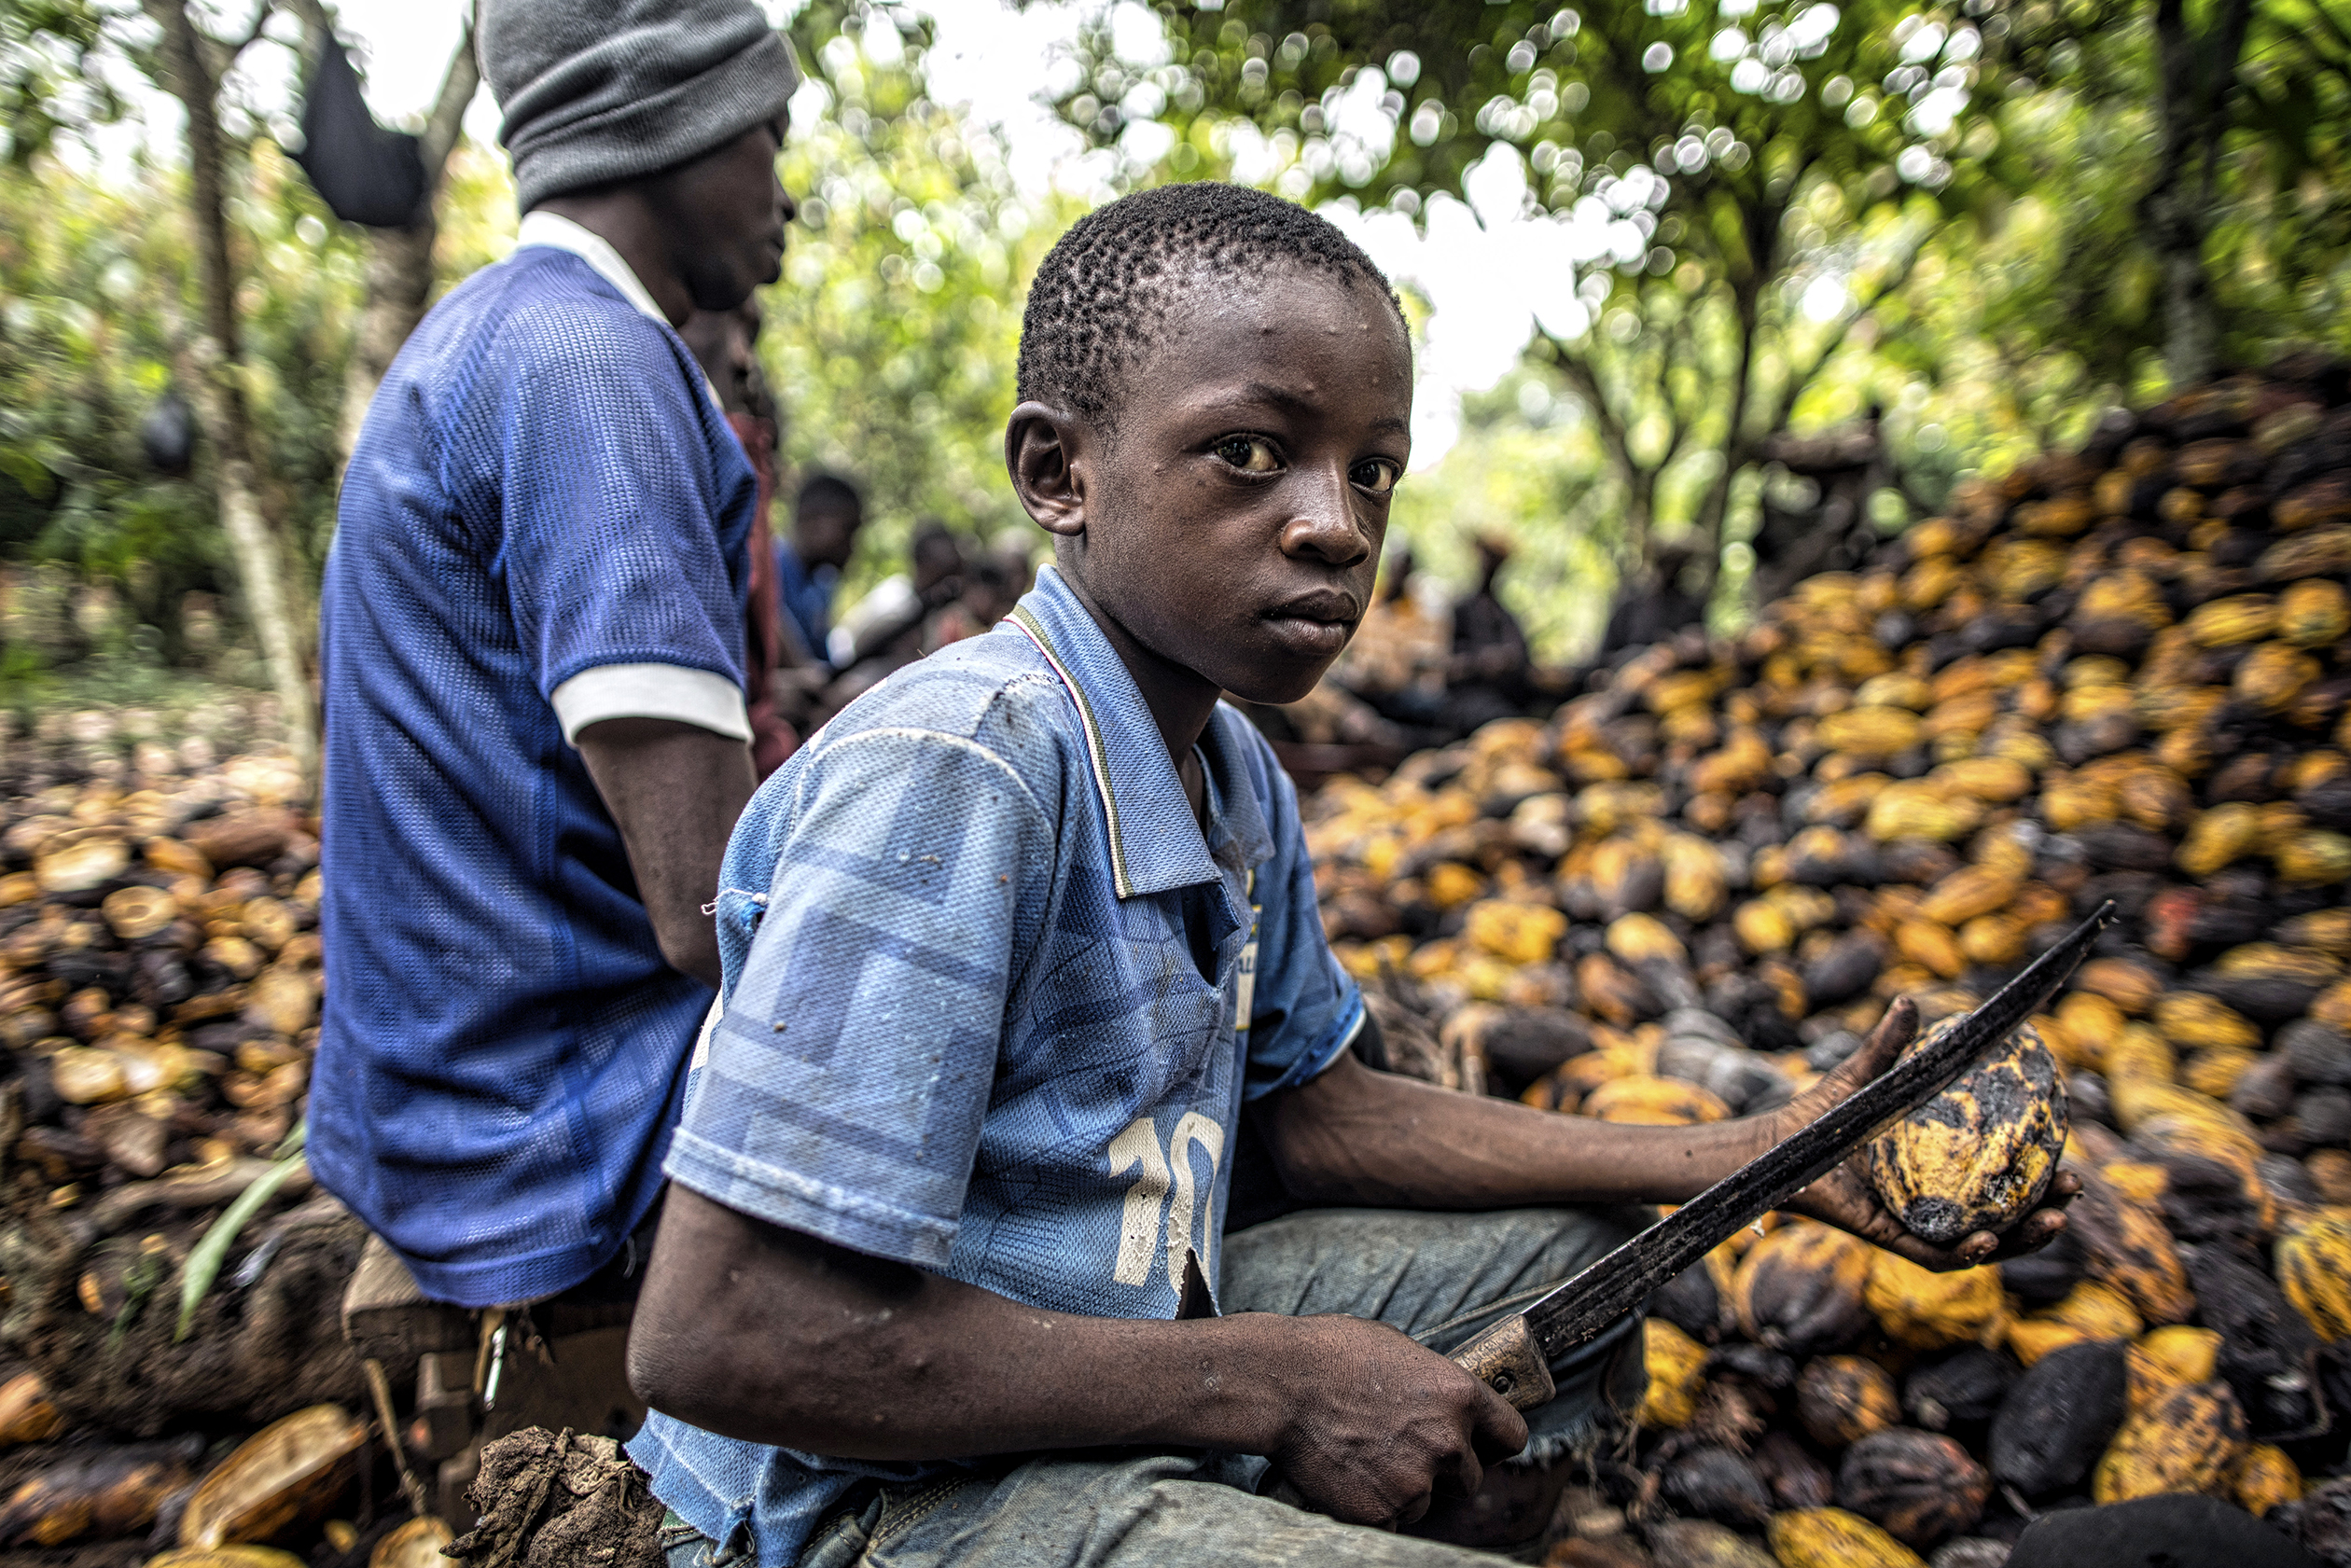 Child chocolate worker in the Ivory Coast (Fortune, 3/1/16) (photo: Benjamin Lowy)